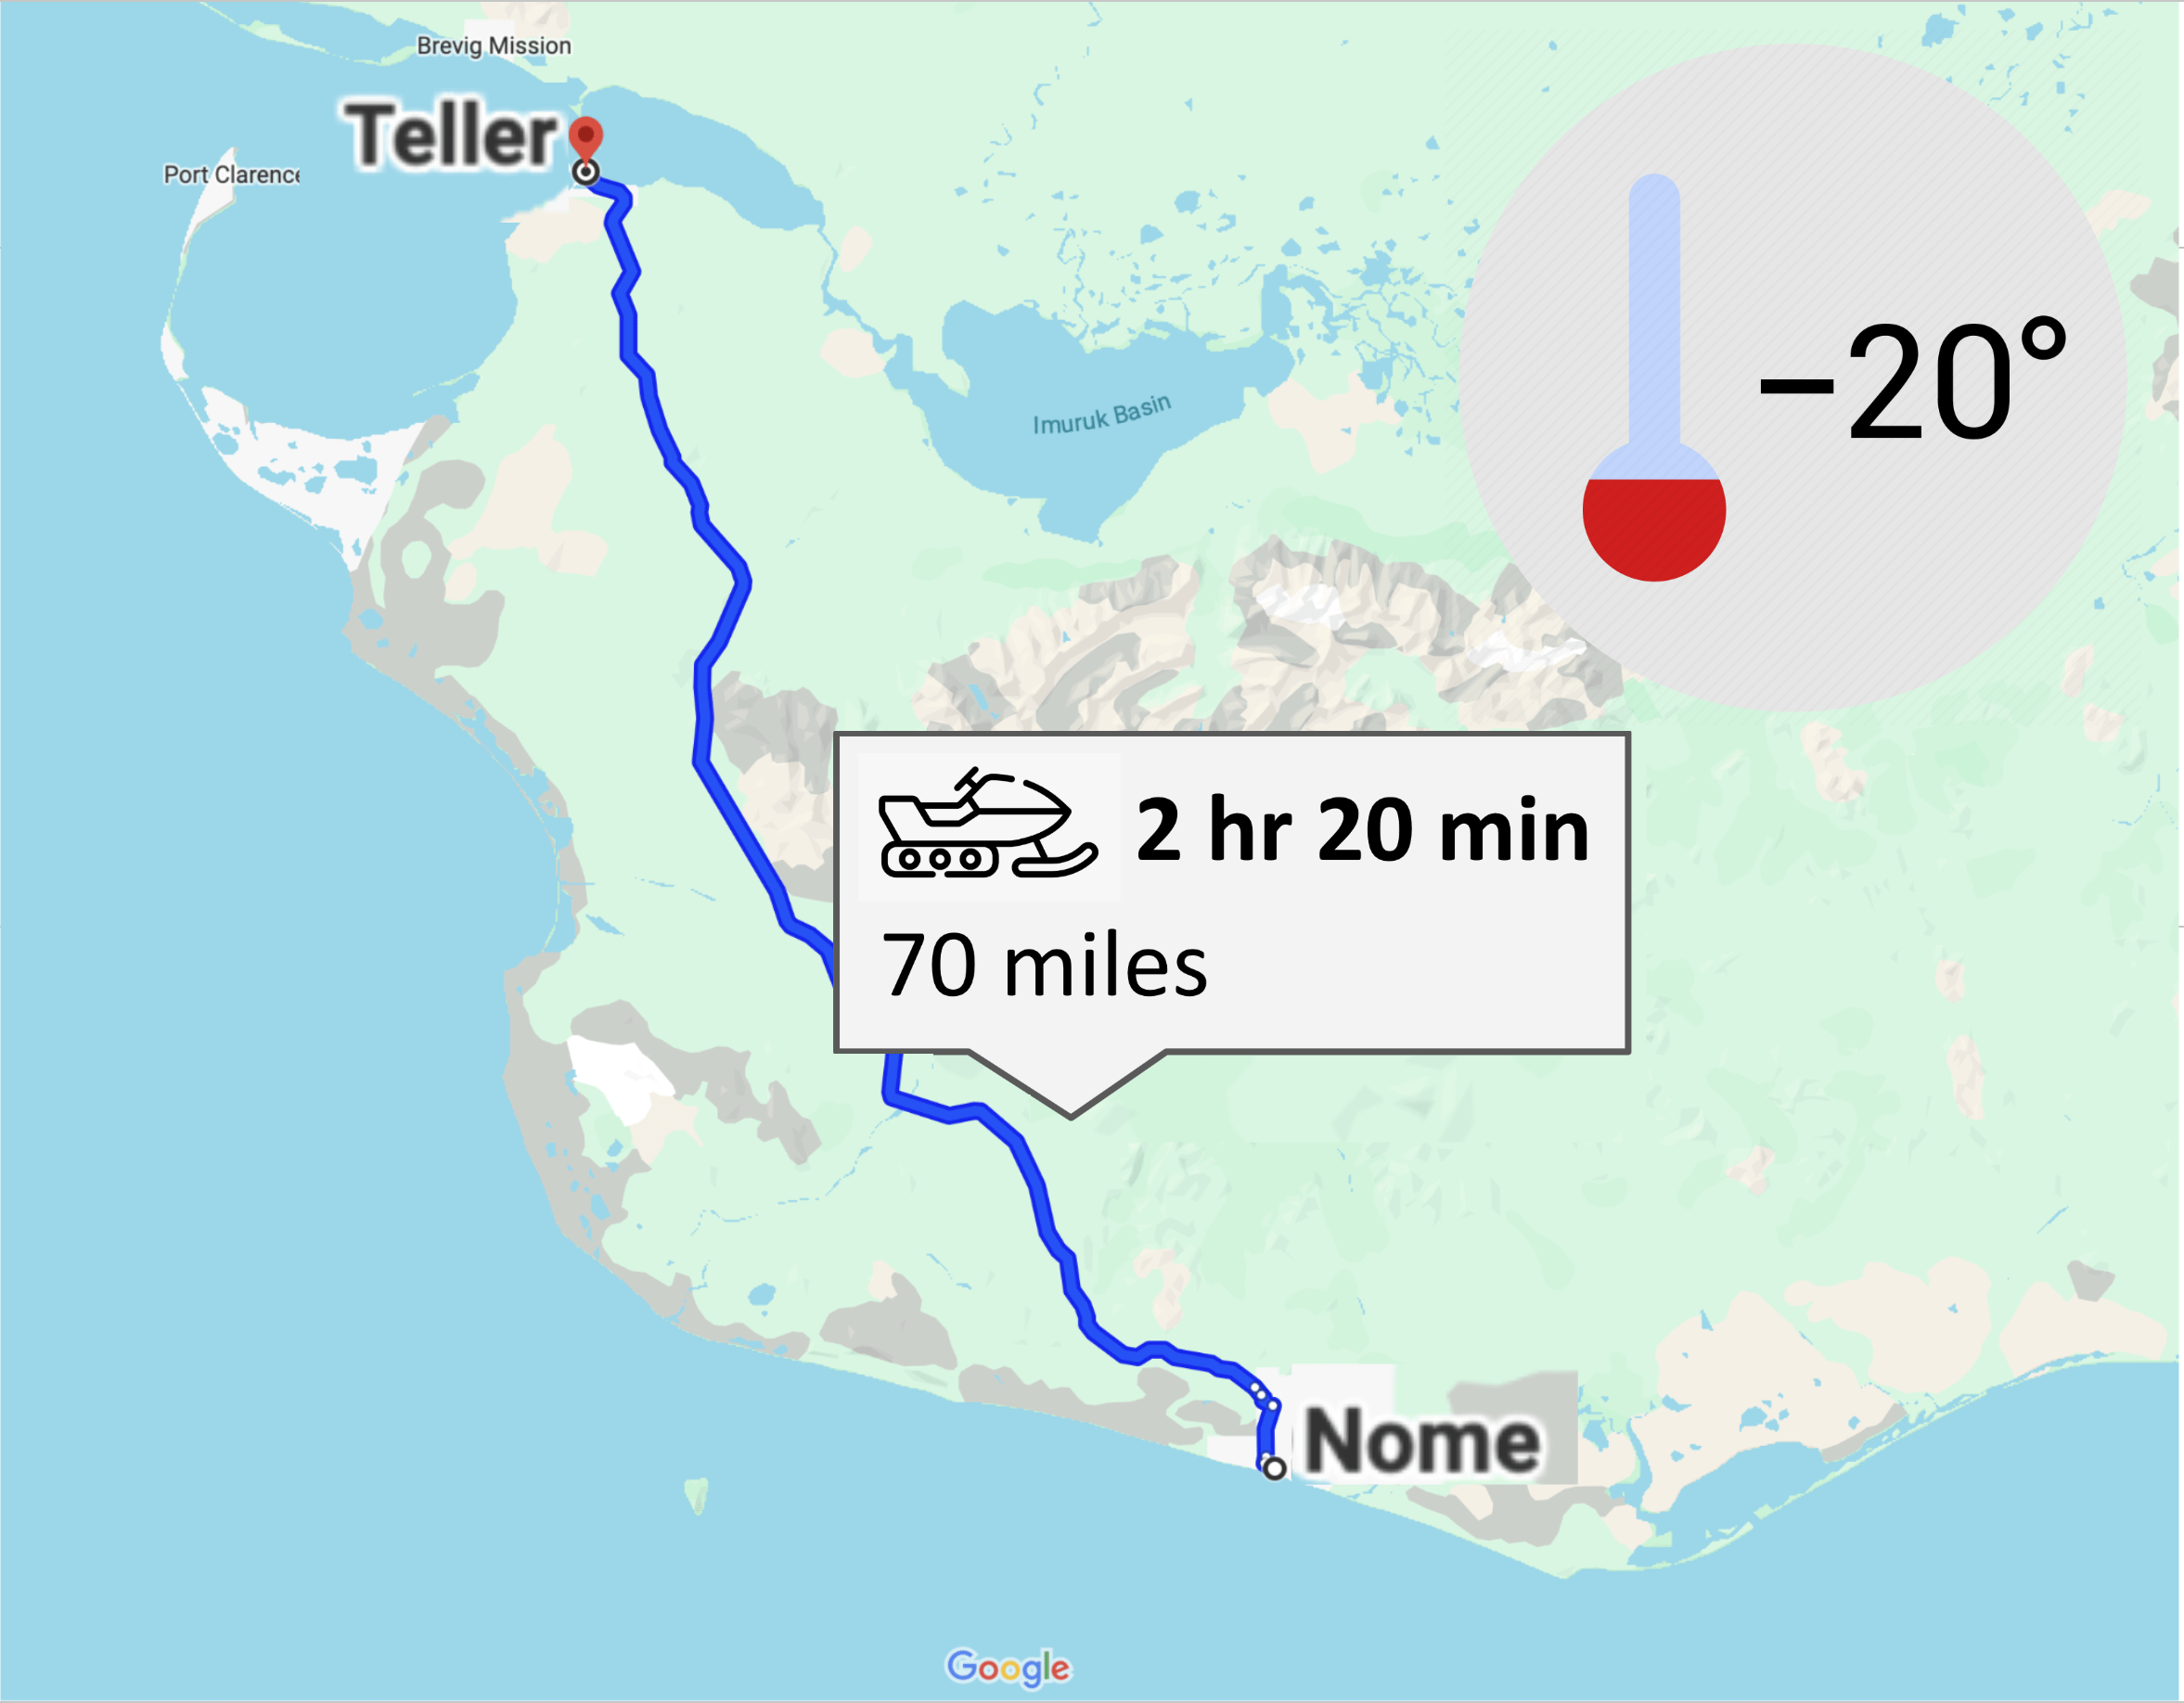 Infographic: 70 miles from Teller, Alaska to Nome, Alaska in below-zero conditions